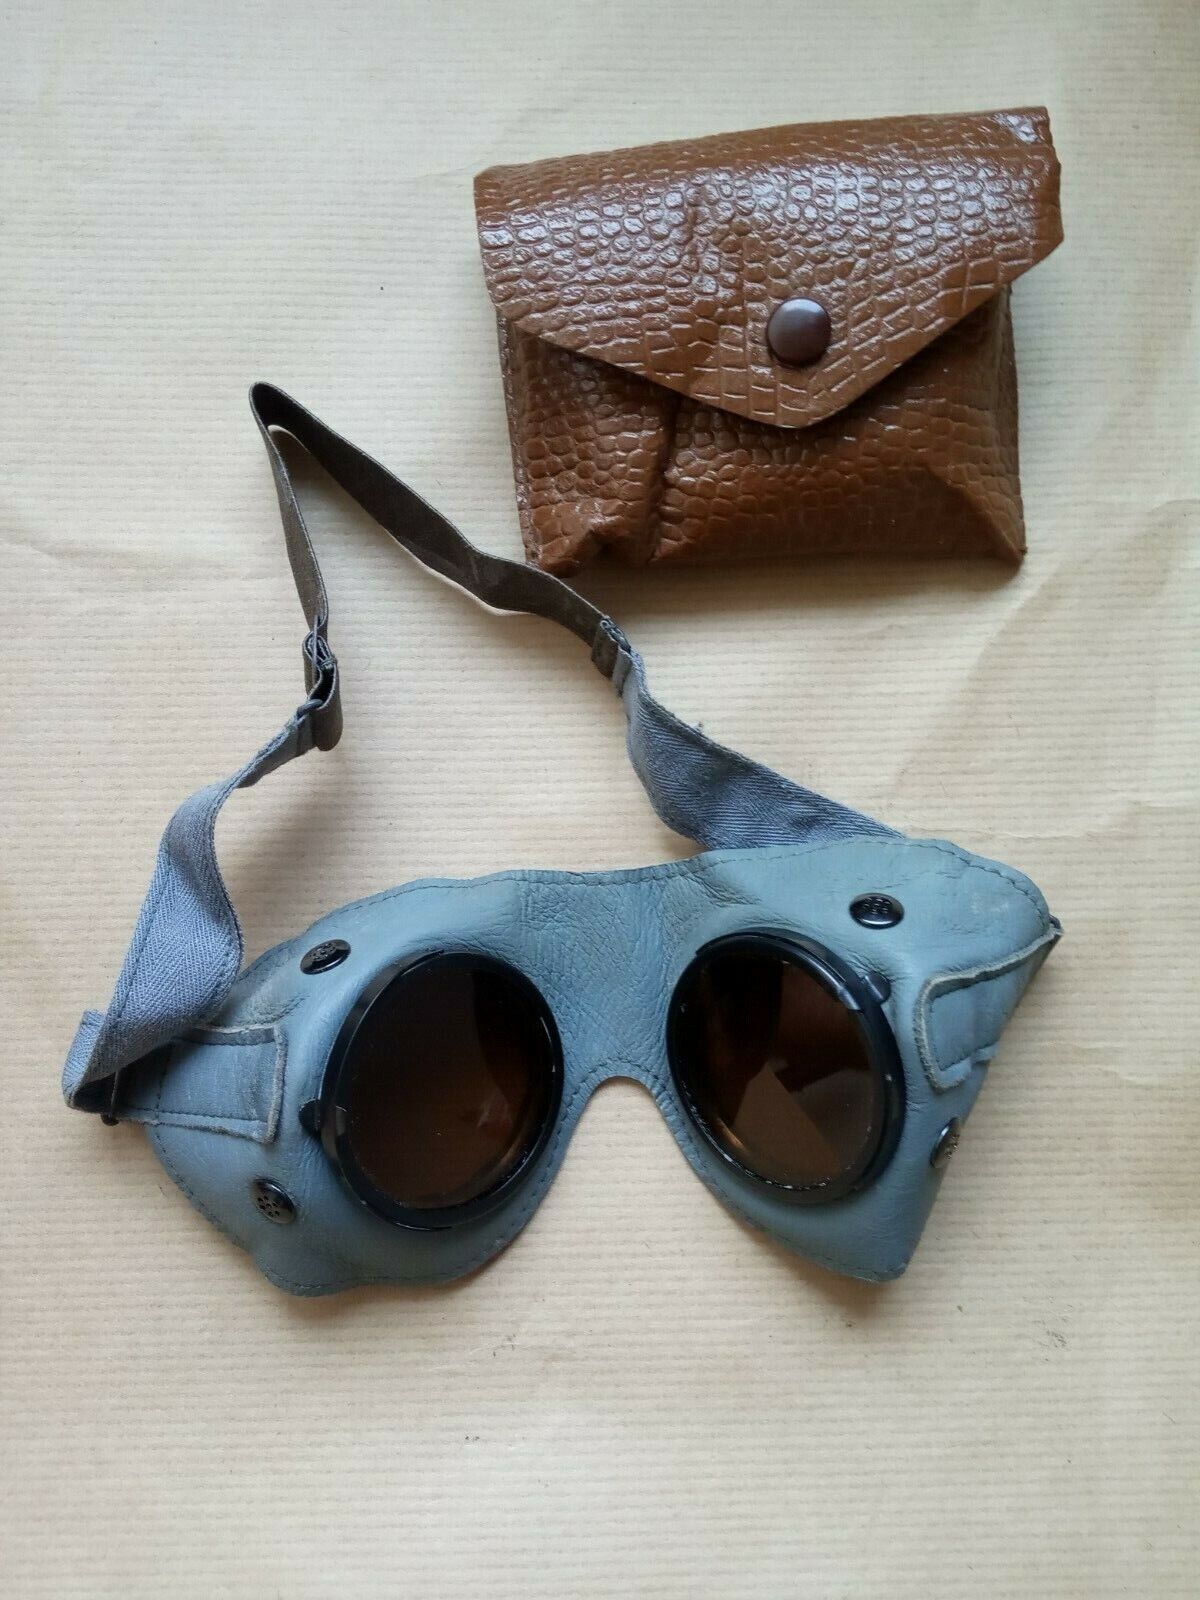  WW2 German GENERAL PURPOSE GOGGLES IN CARRYING POUCH.(W)